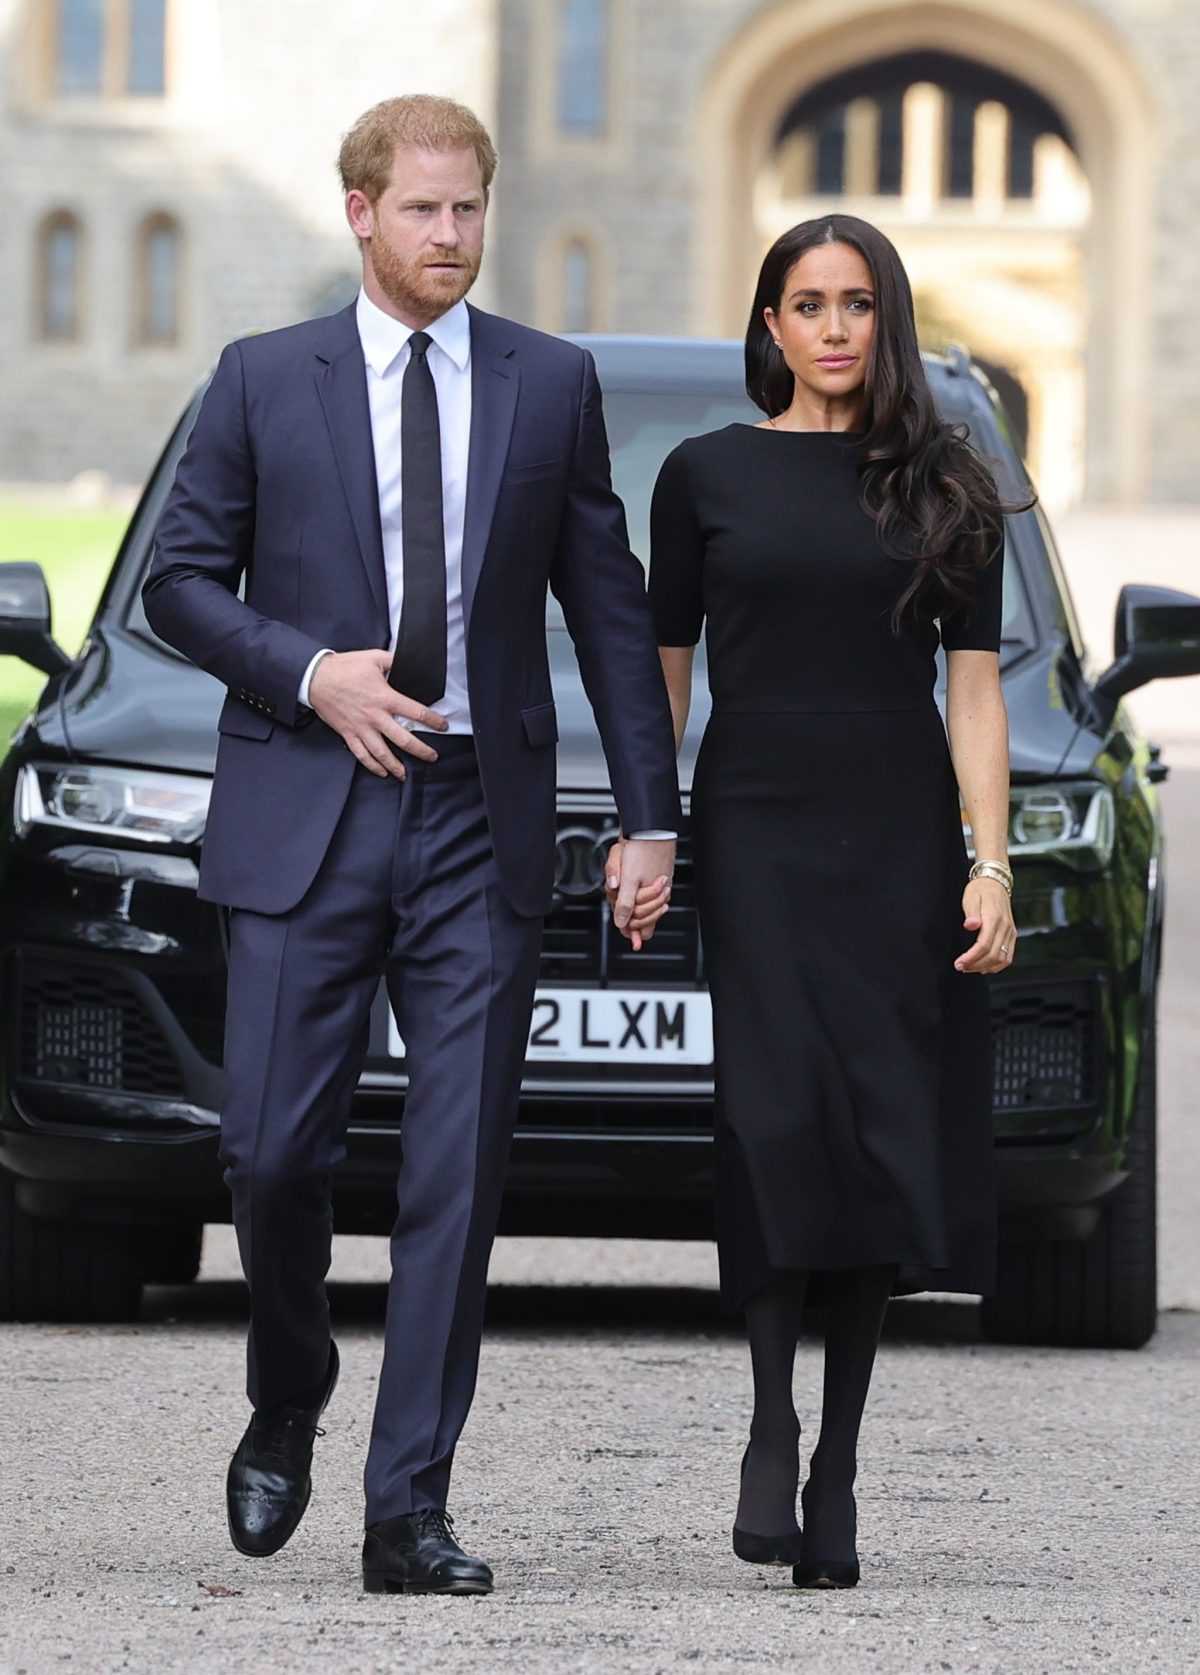 uncertainty-remains-about-harry-and-meghan’s-appearance-in-king-charles-iii’s-coronation-ceremony